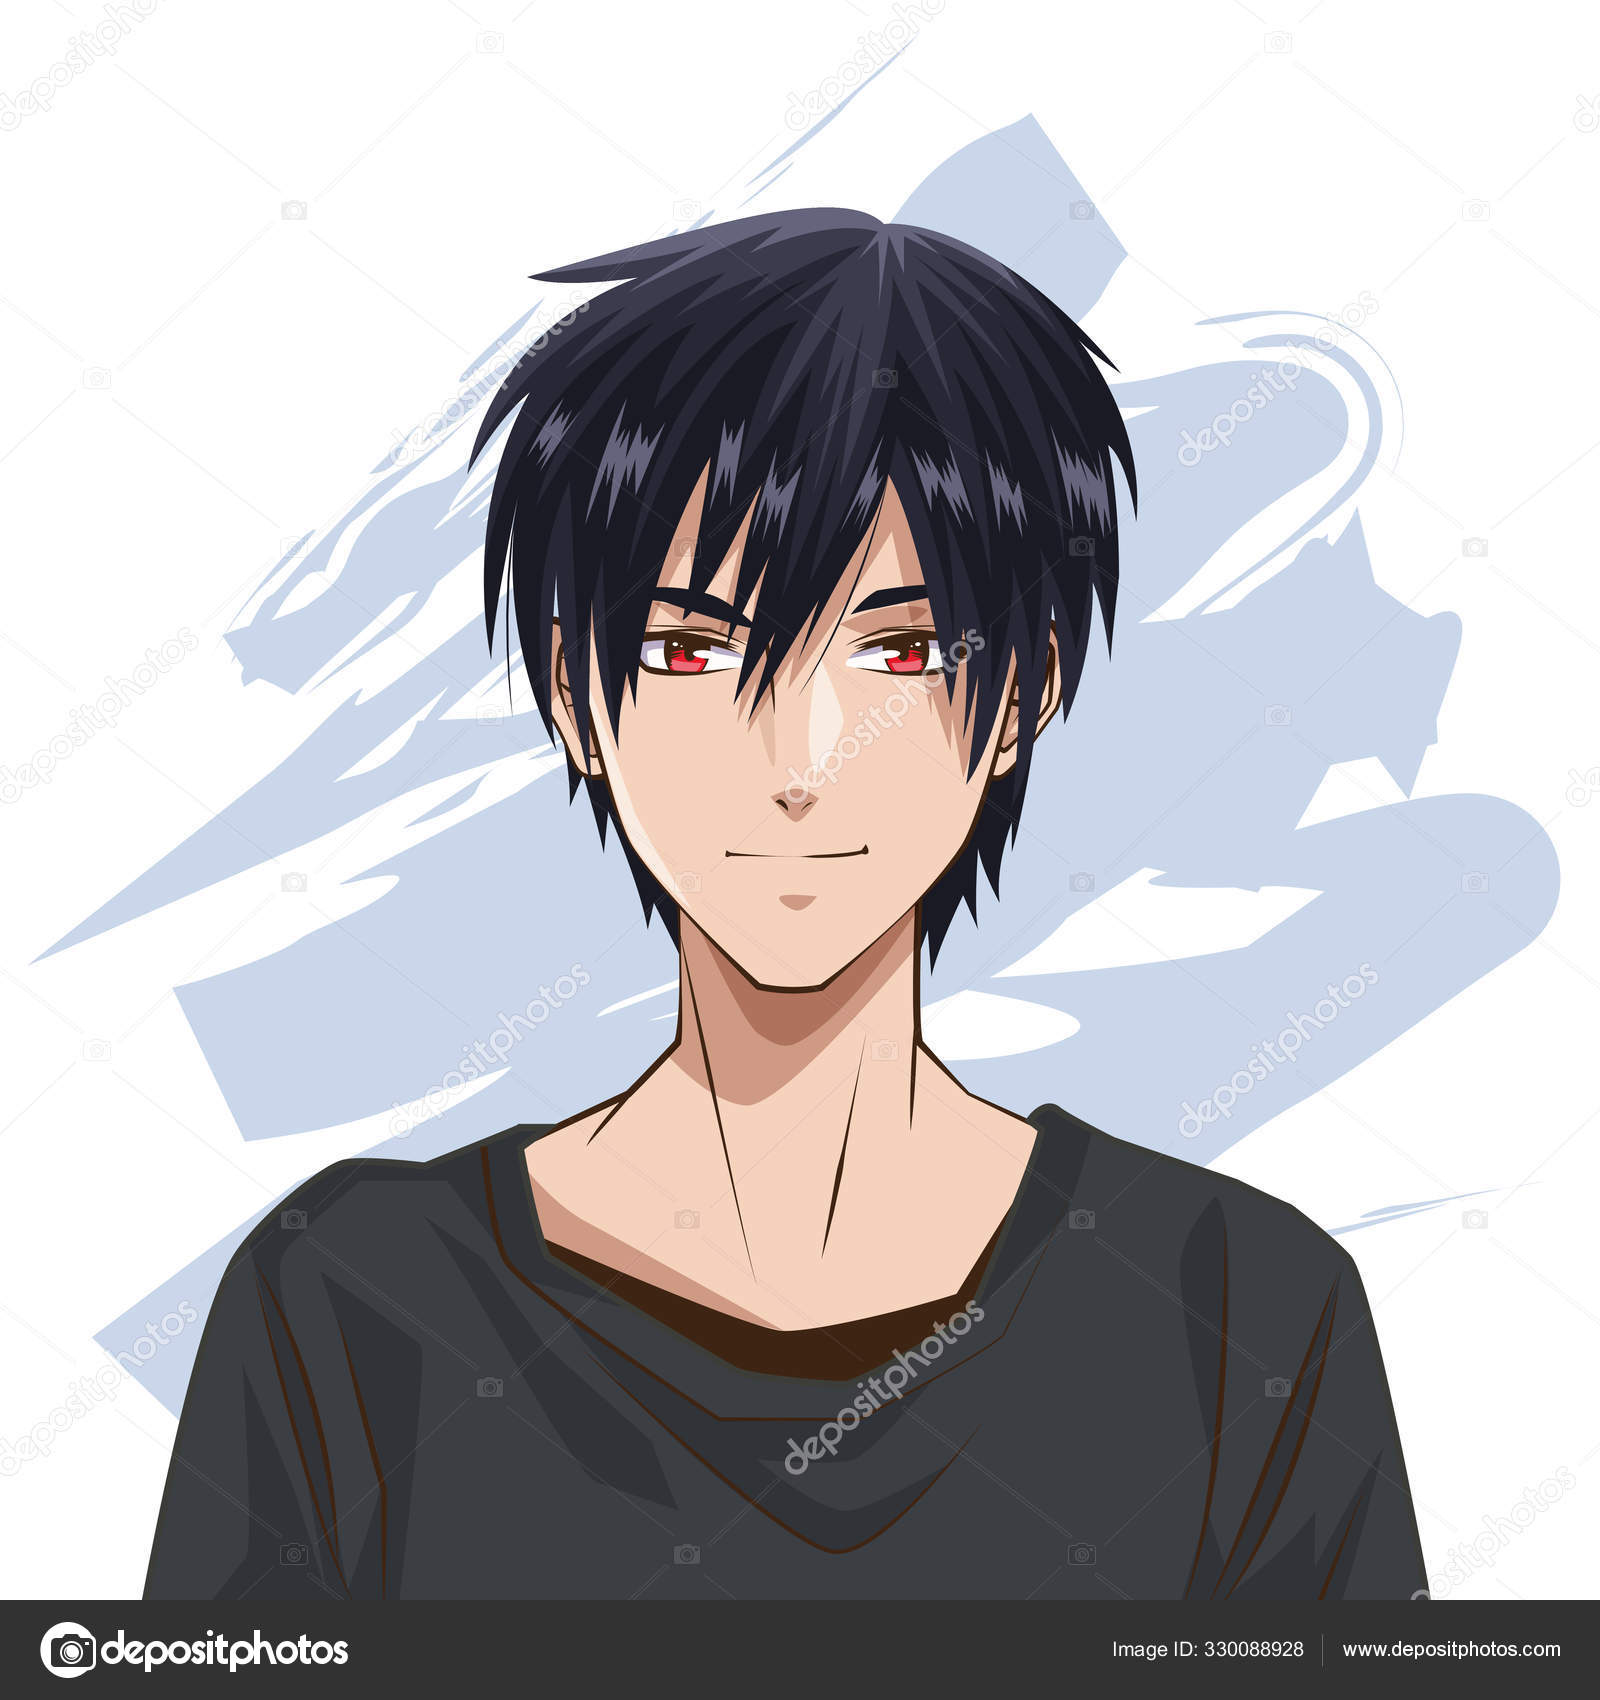 Anime Young Male Isolated Icon Stock Vector by ©djv 605615544